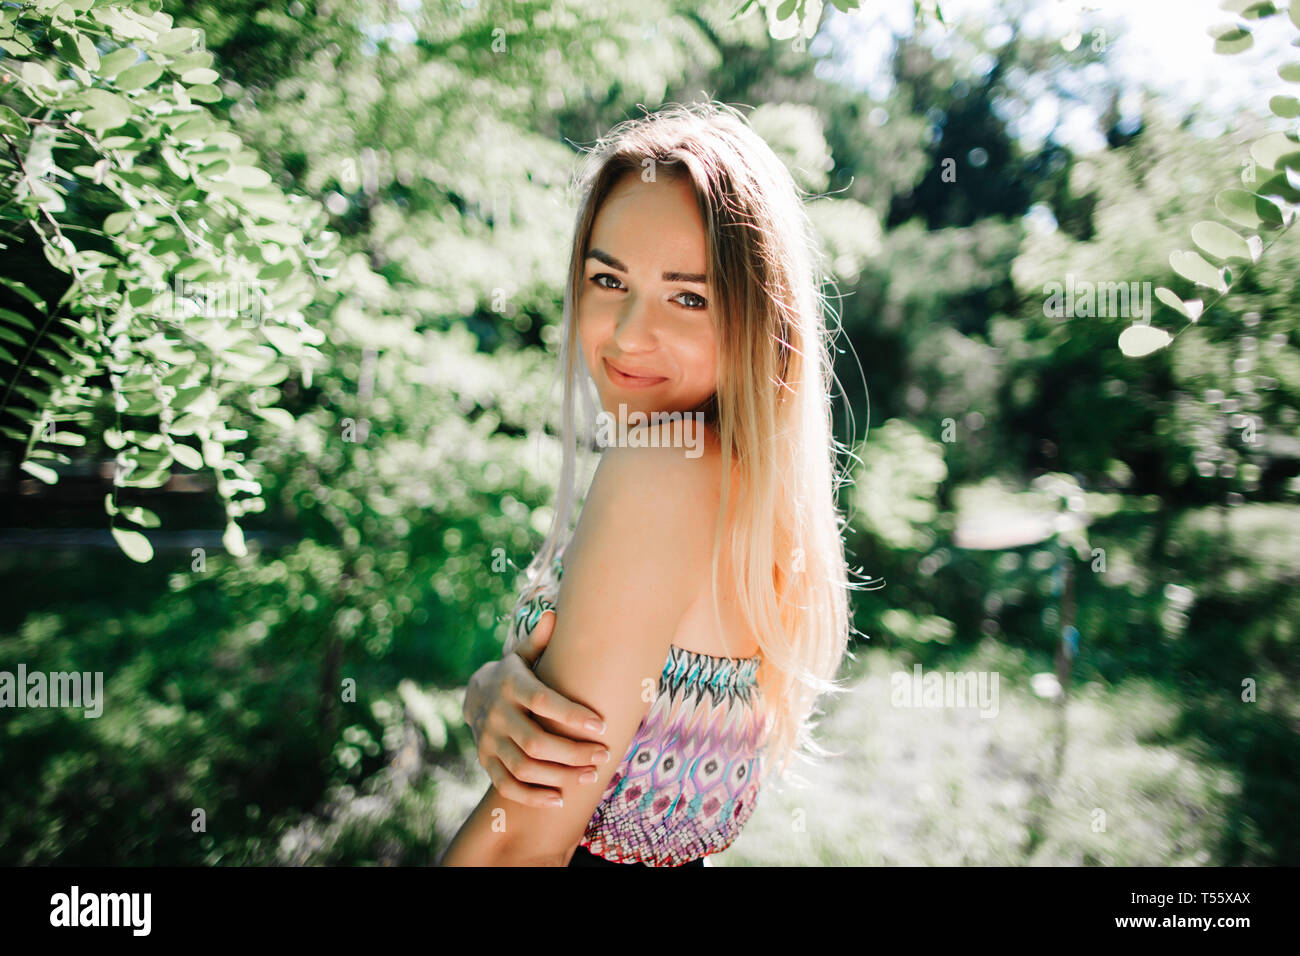 Young woman smiling in park Stock Photo